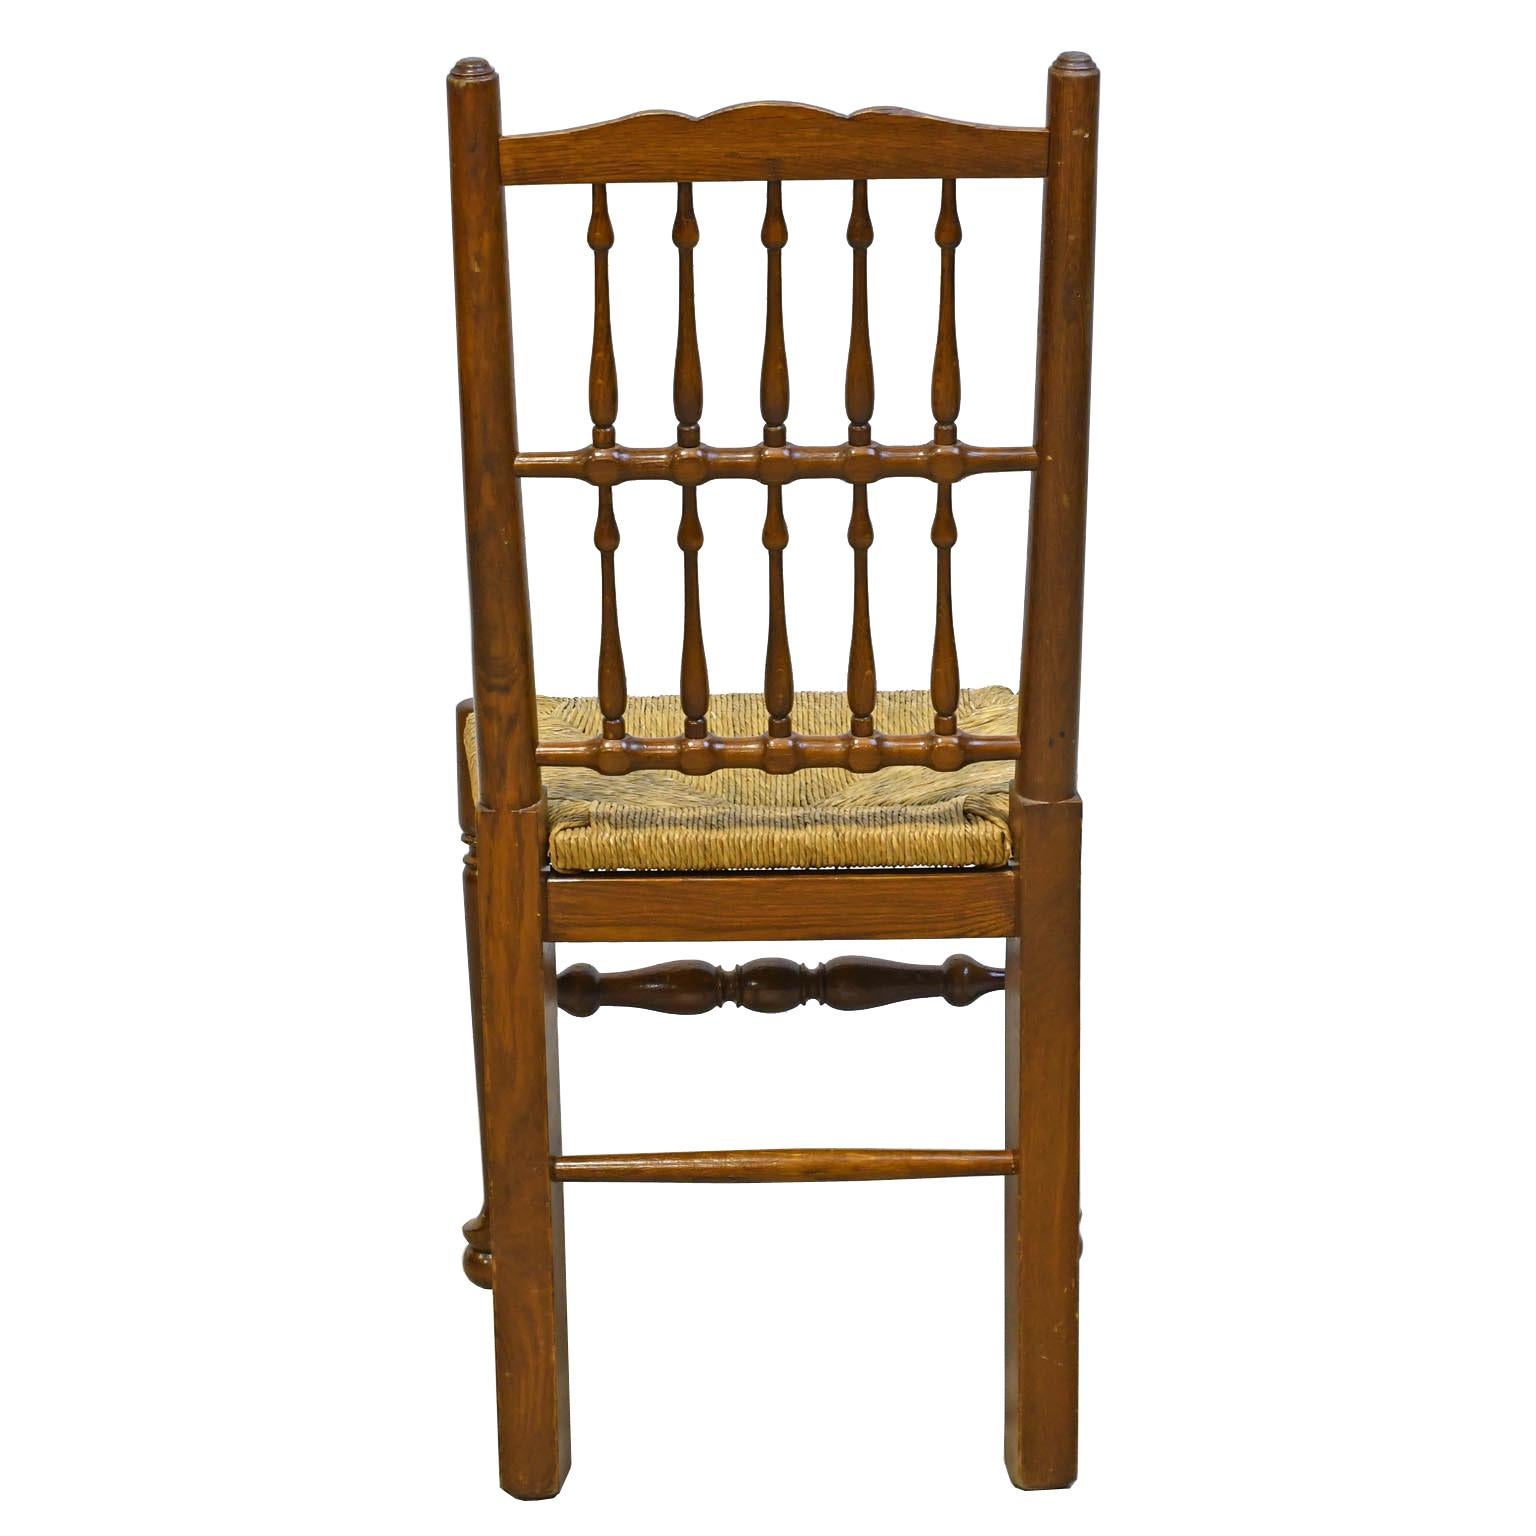 20th Century Set of 8 English Made Oak Dining Chairs with Rush Seats, circa 1990s